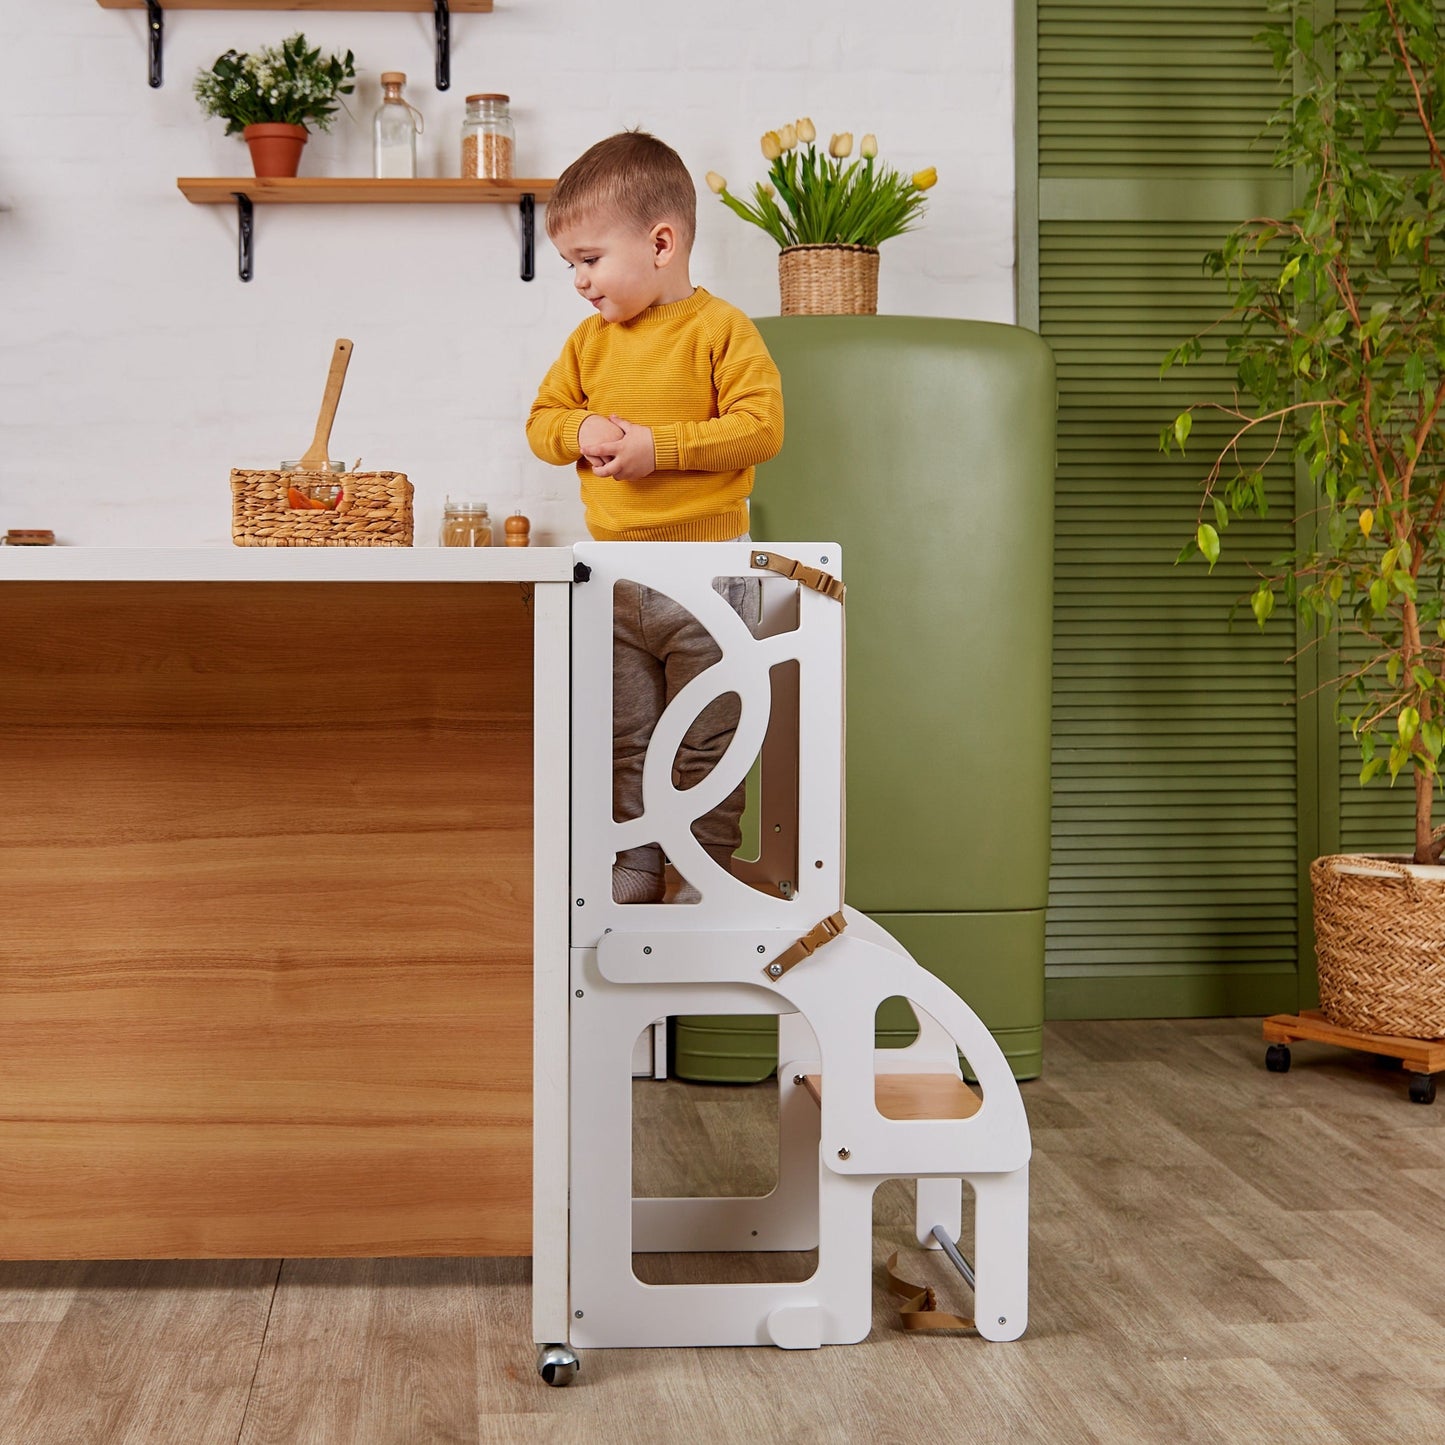 KITCHEN STOOL/ MONTESSORI LEARNING TOWER REVIEW 